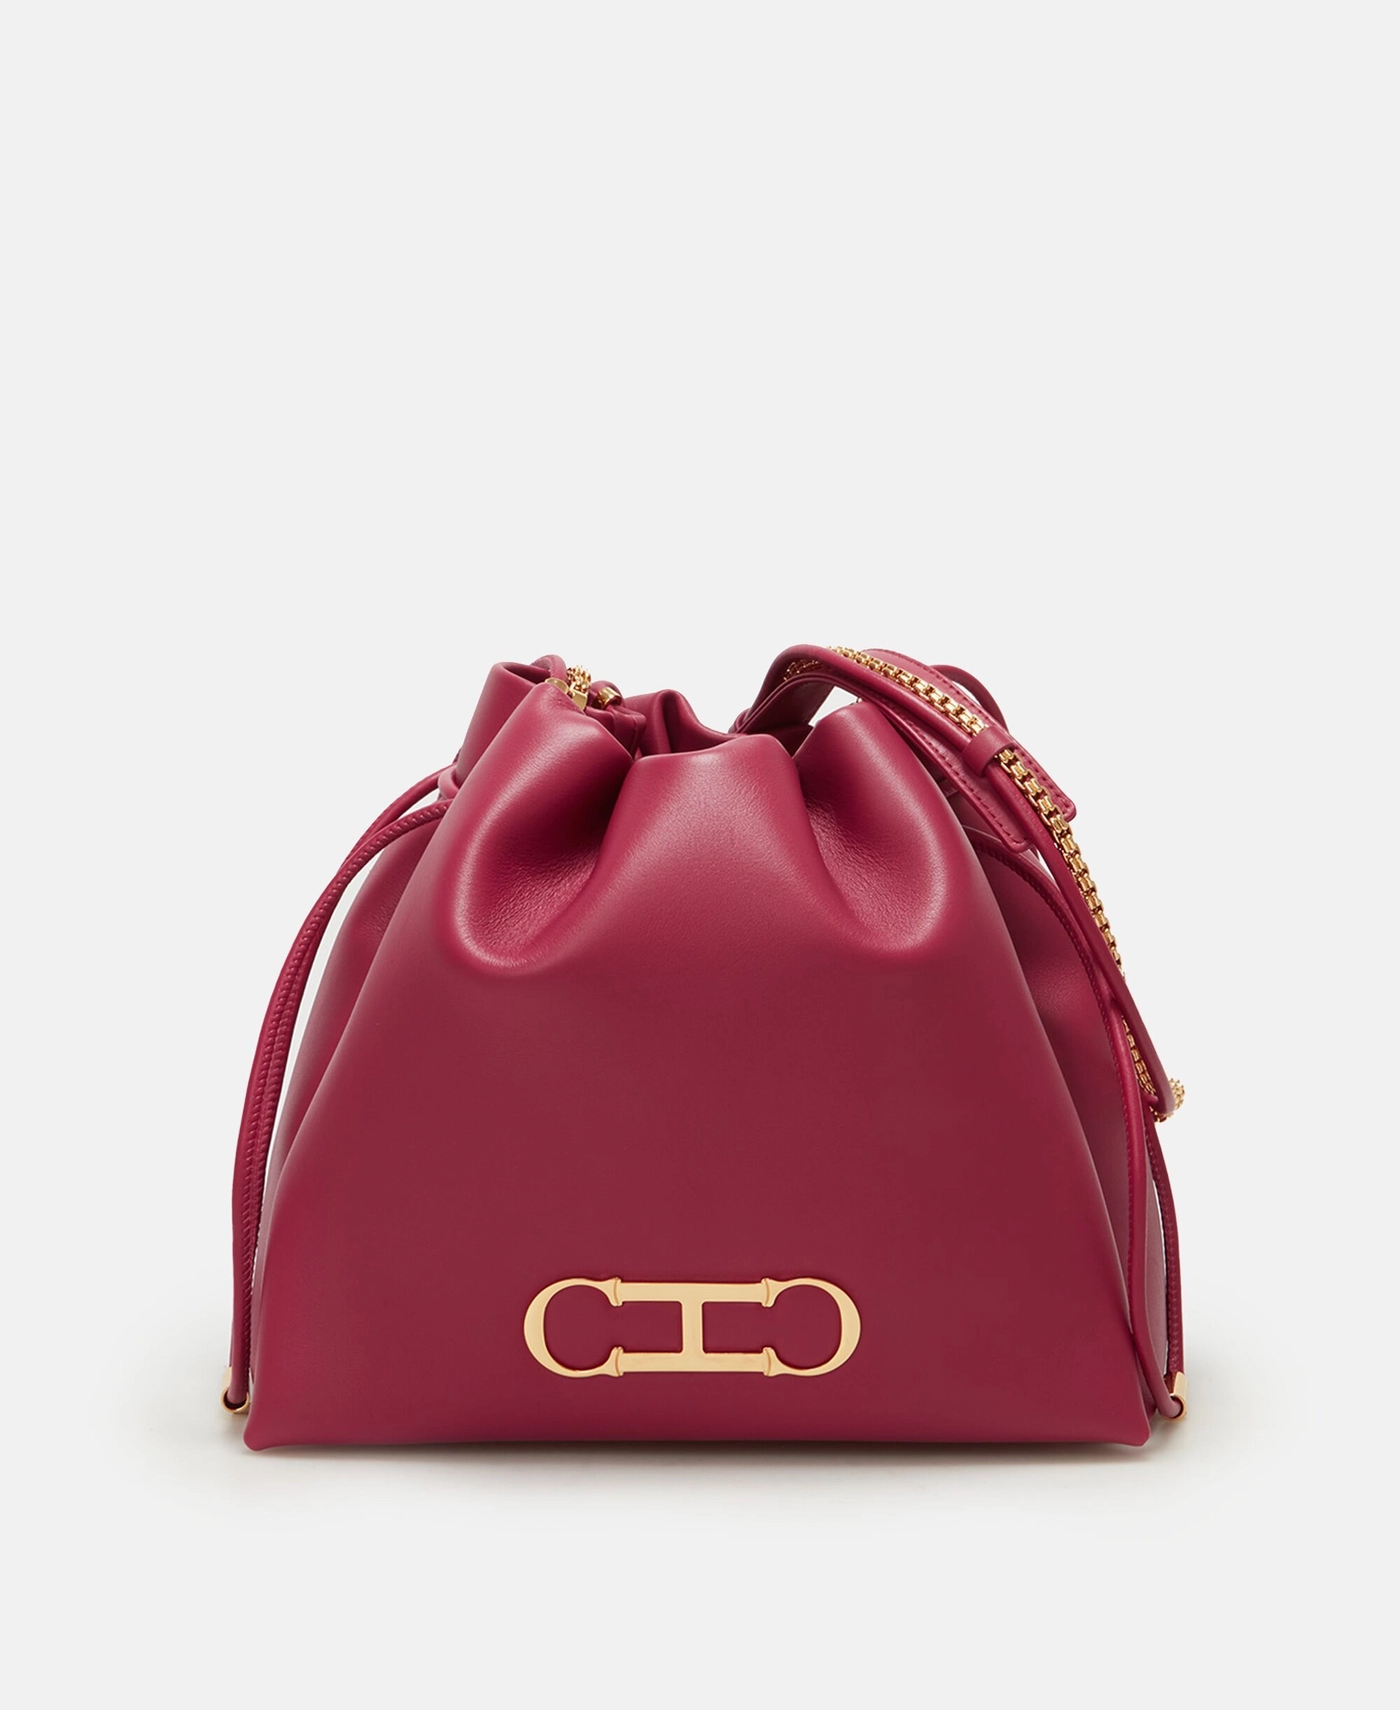 A Last-Minute Trendy Gift Guide to Wow Your Loved Ones CAROLINA HERRERA SOFT BUCKET BAG